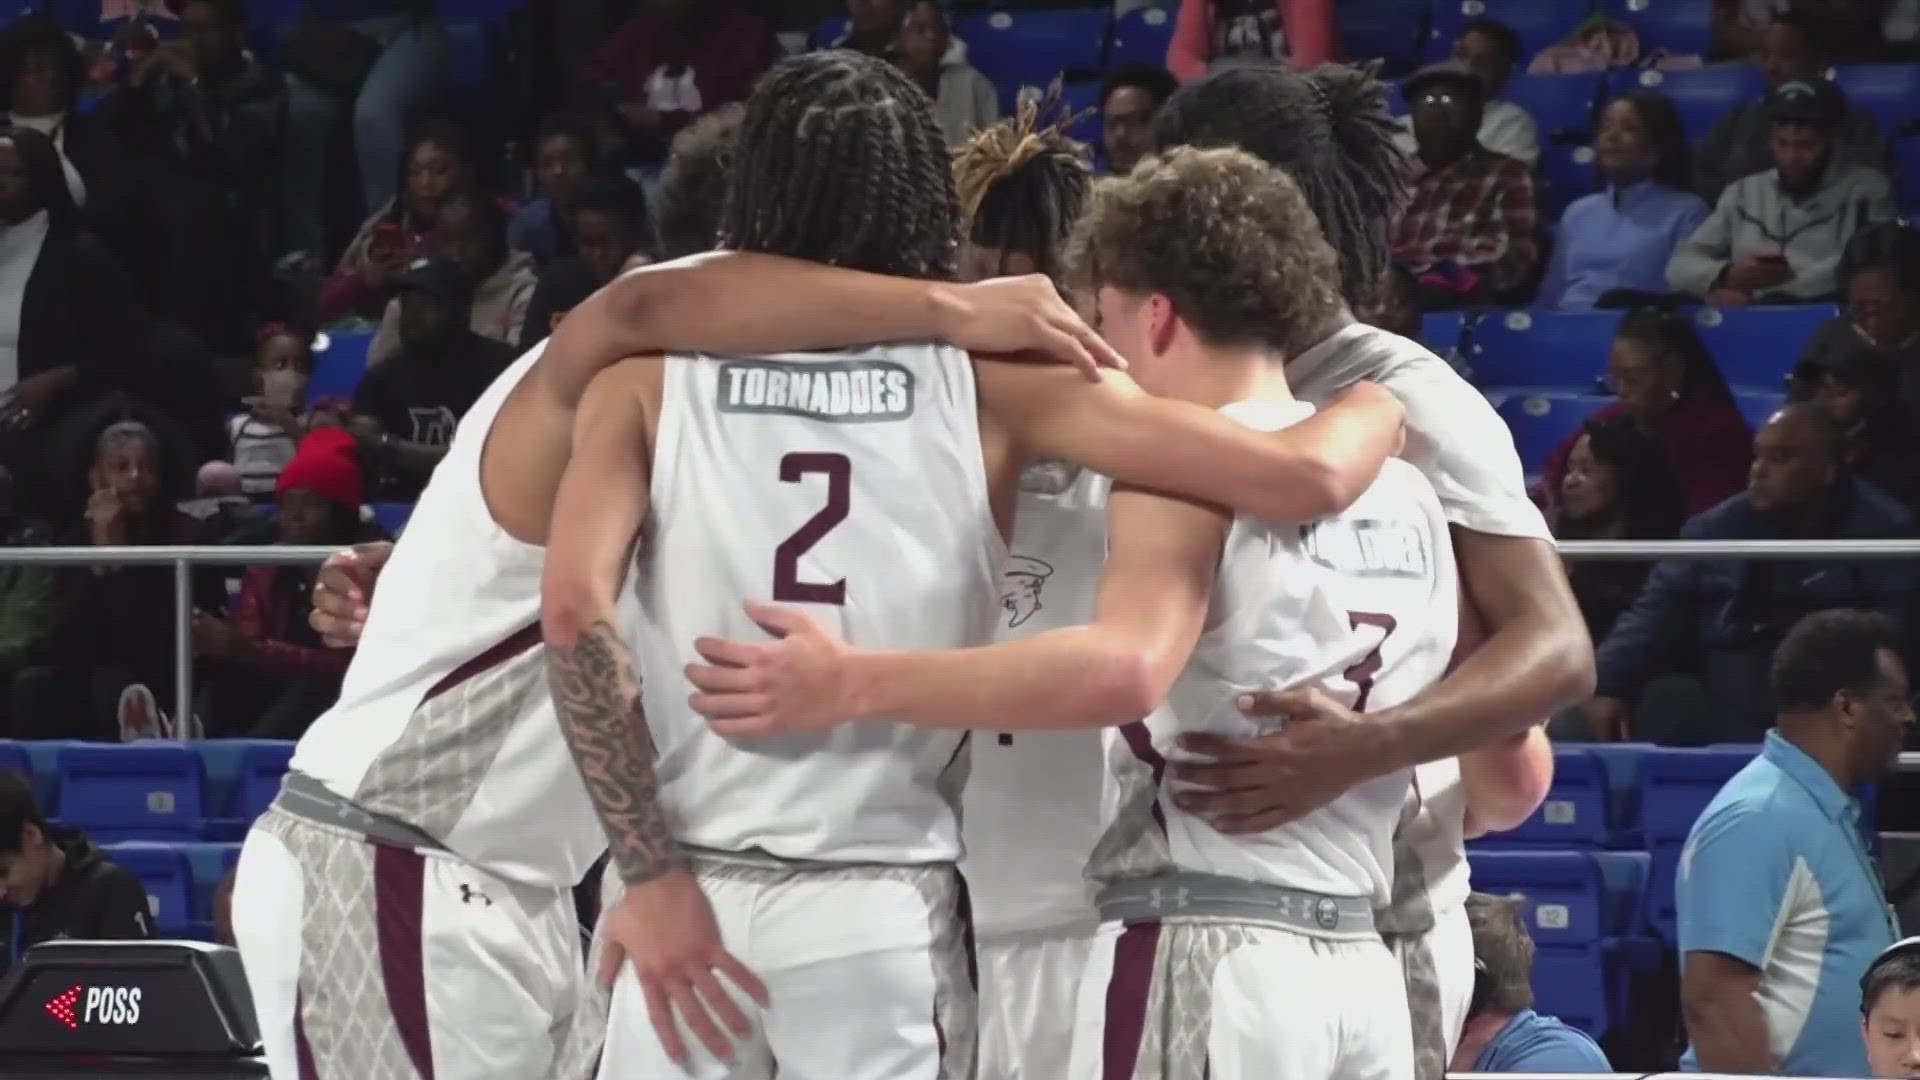 Alcoa boys' basketball won its first state championship on Saturday night by defeating Frederick Douglass High School.